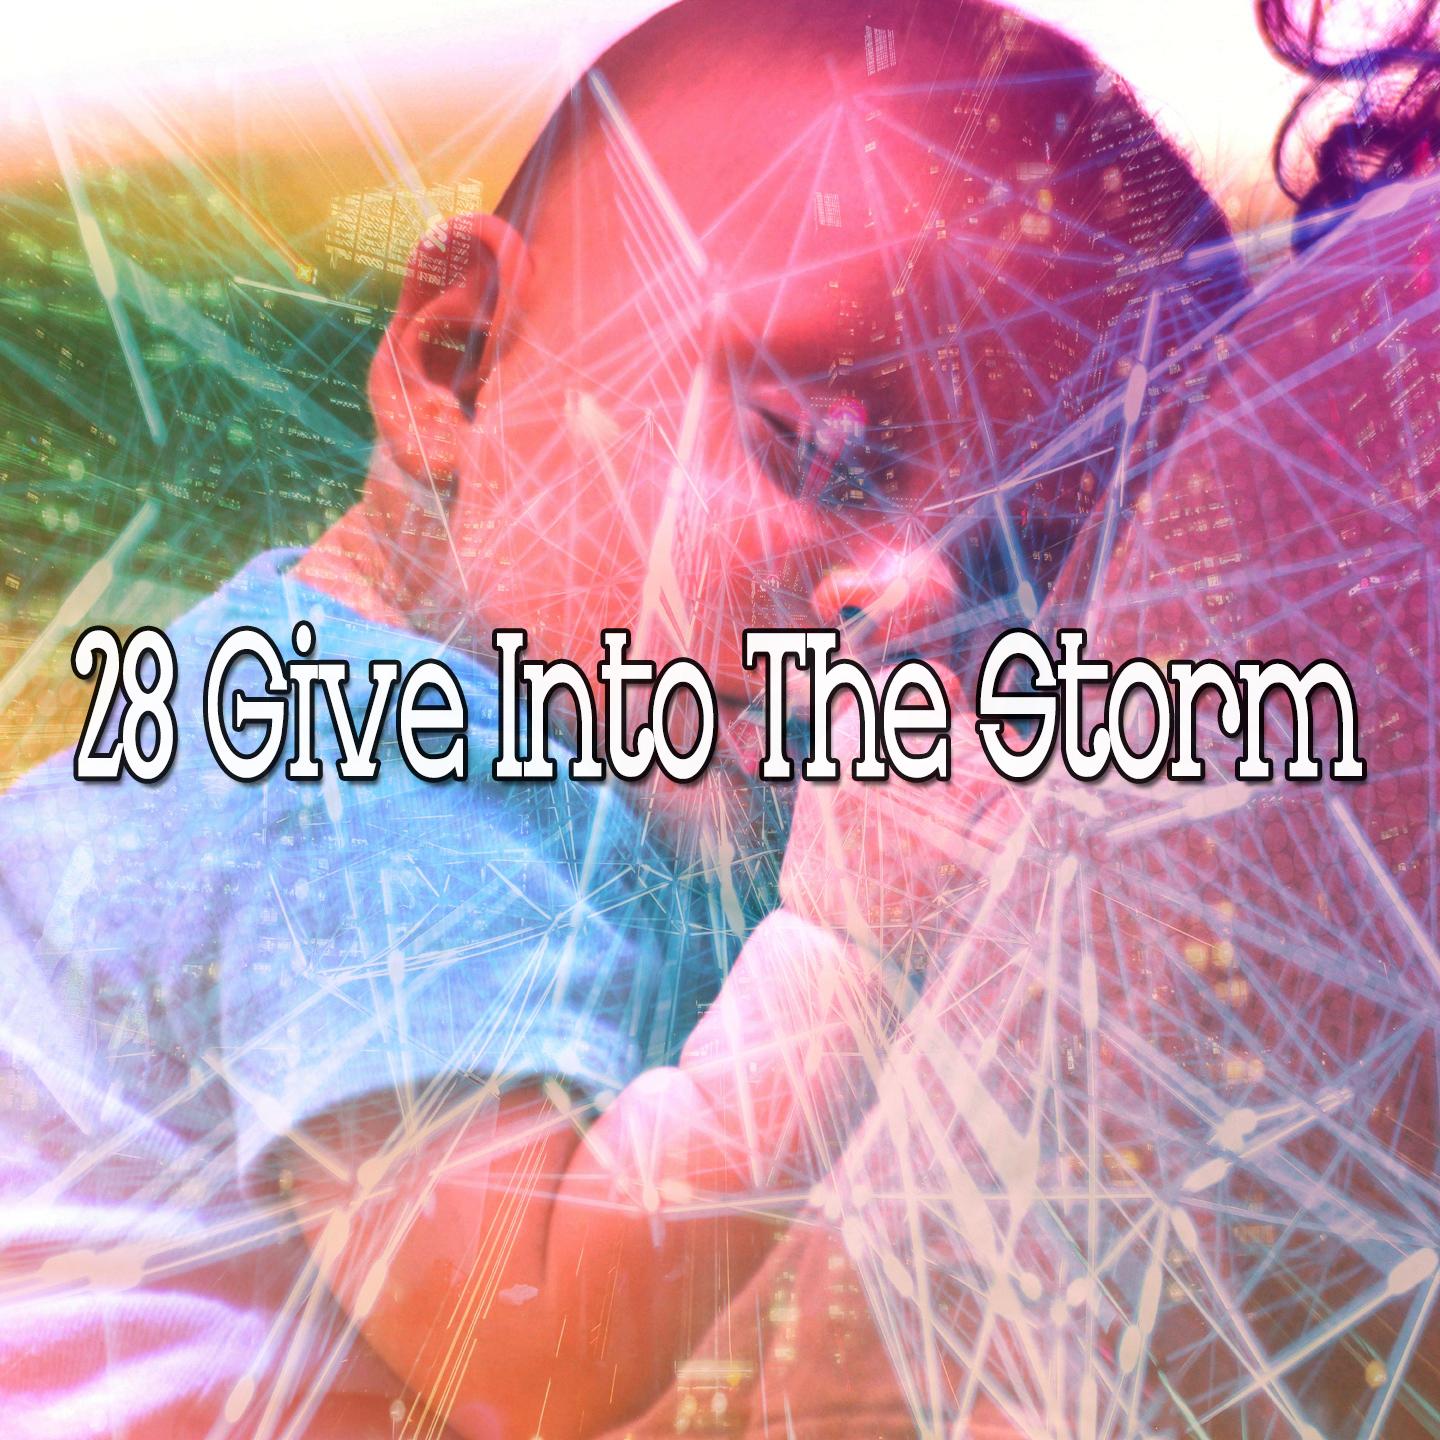 28 Give Into the Storm